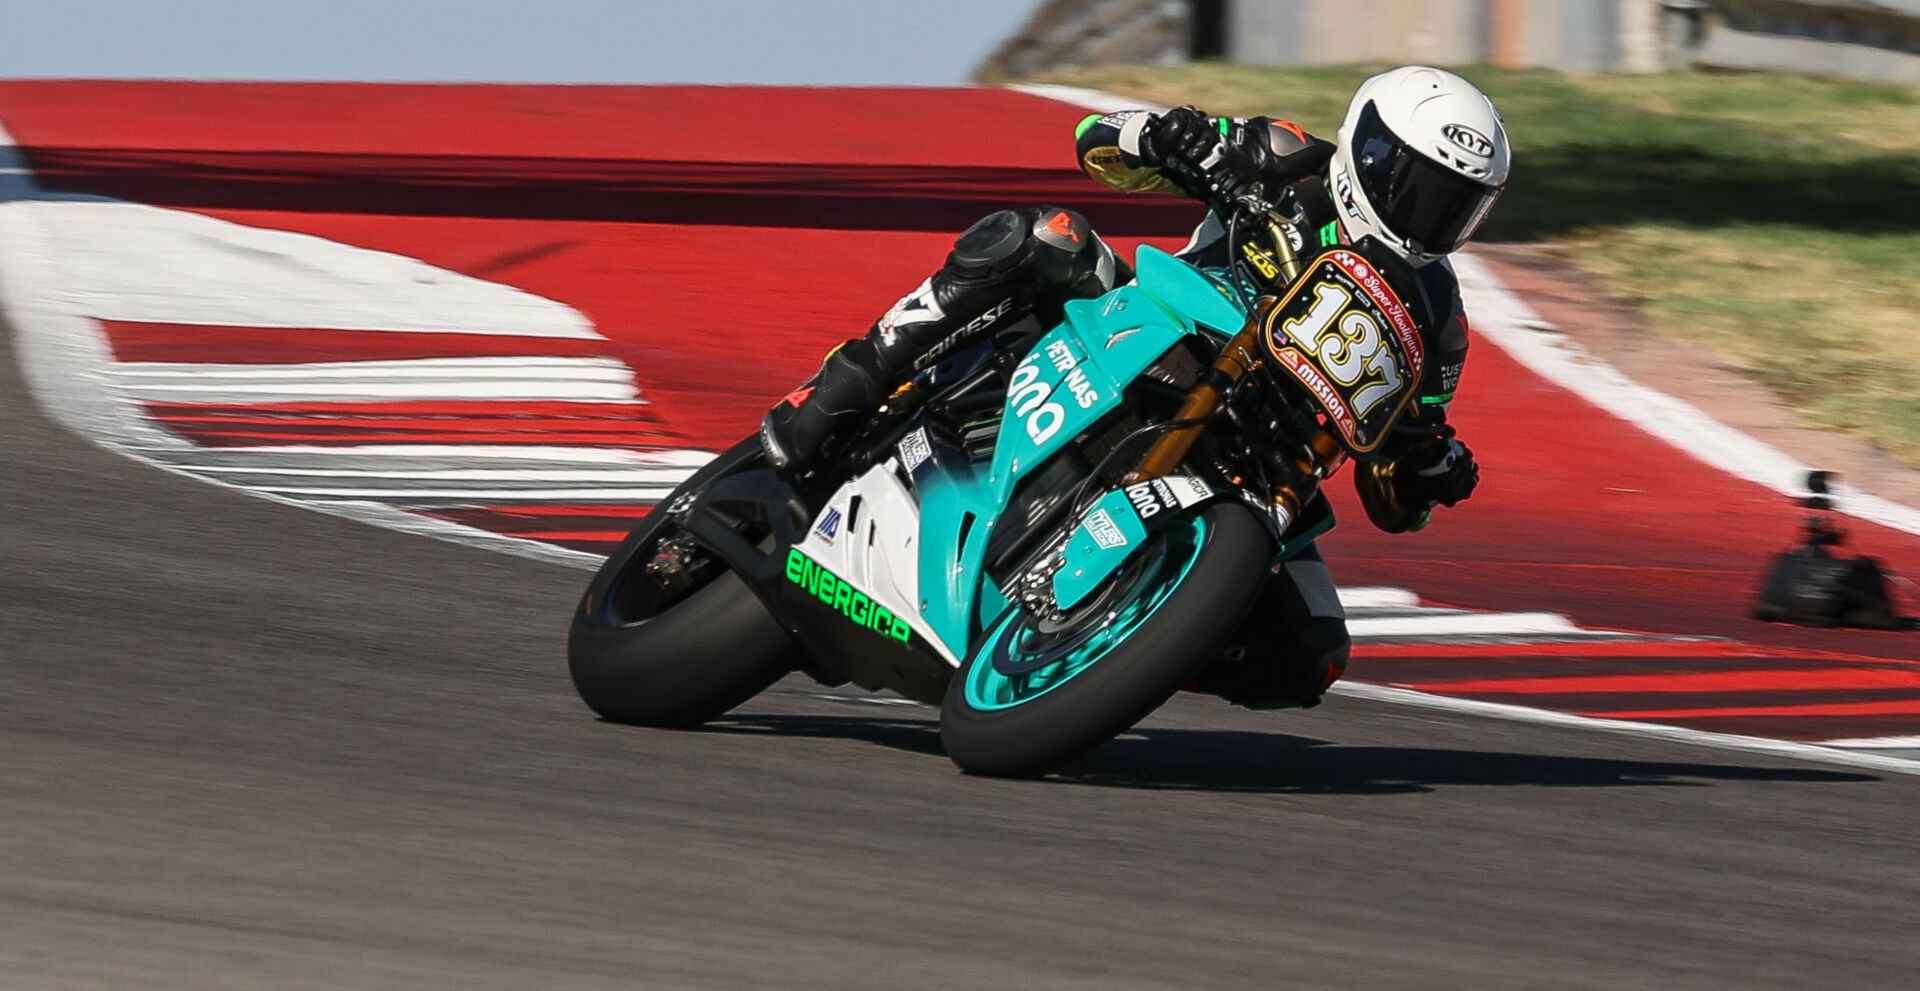 Stefano Mesa (137) riding his Tytlers Cycle Racing Energica Ribelle RS to a second-place finish in a MotoAmerica Mission Super Hooligan race at Circuit of The Americas (COTA). Photo courtesy Energica.